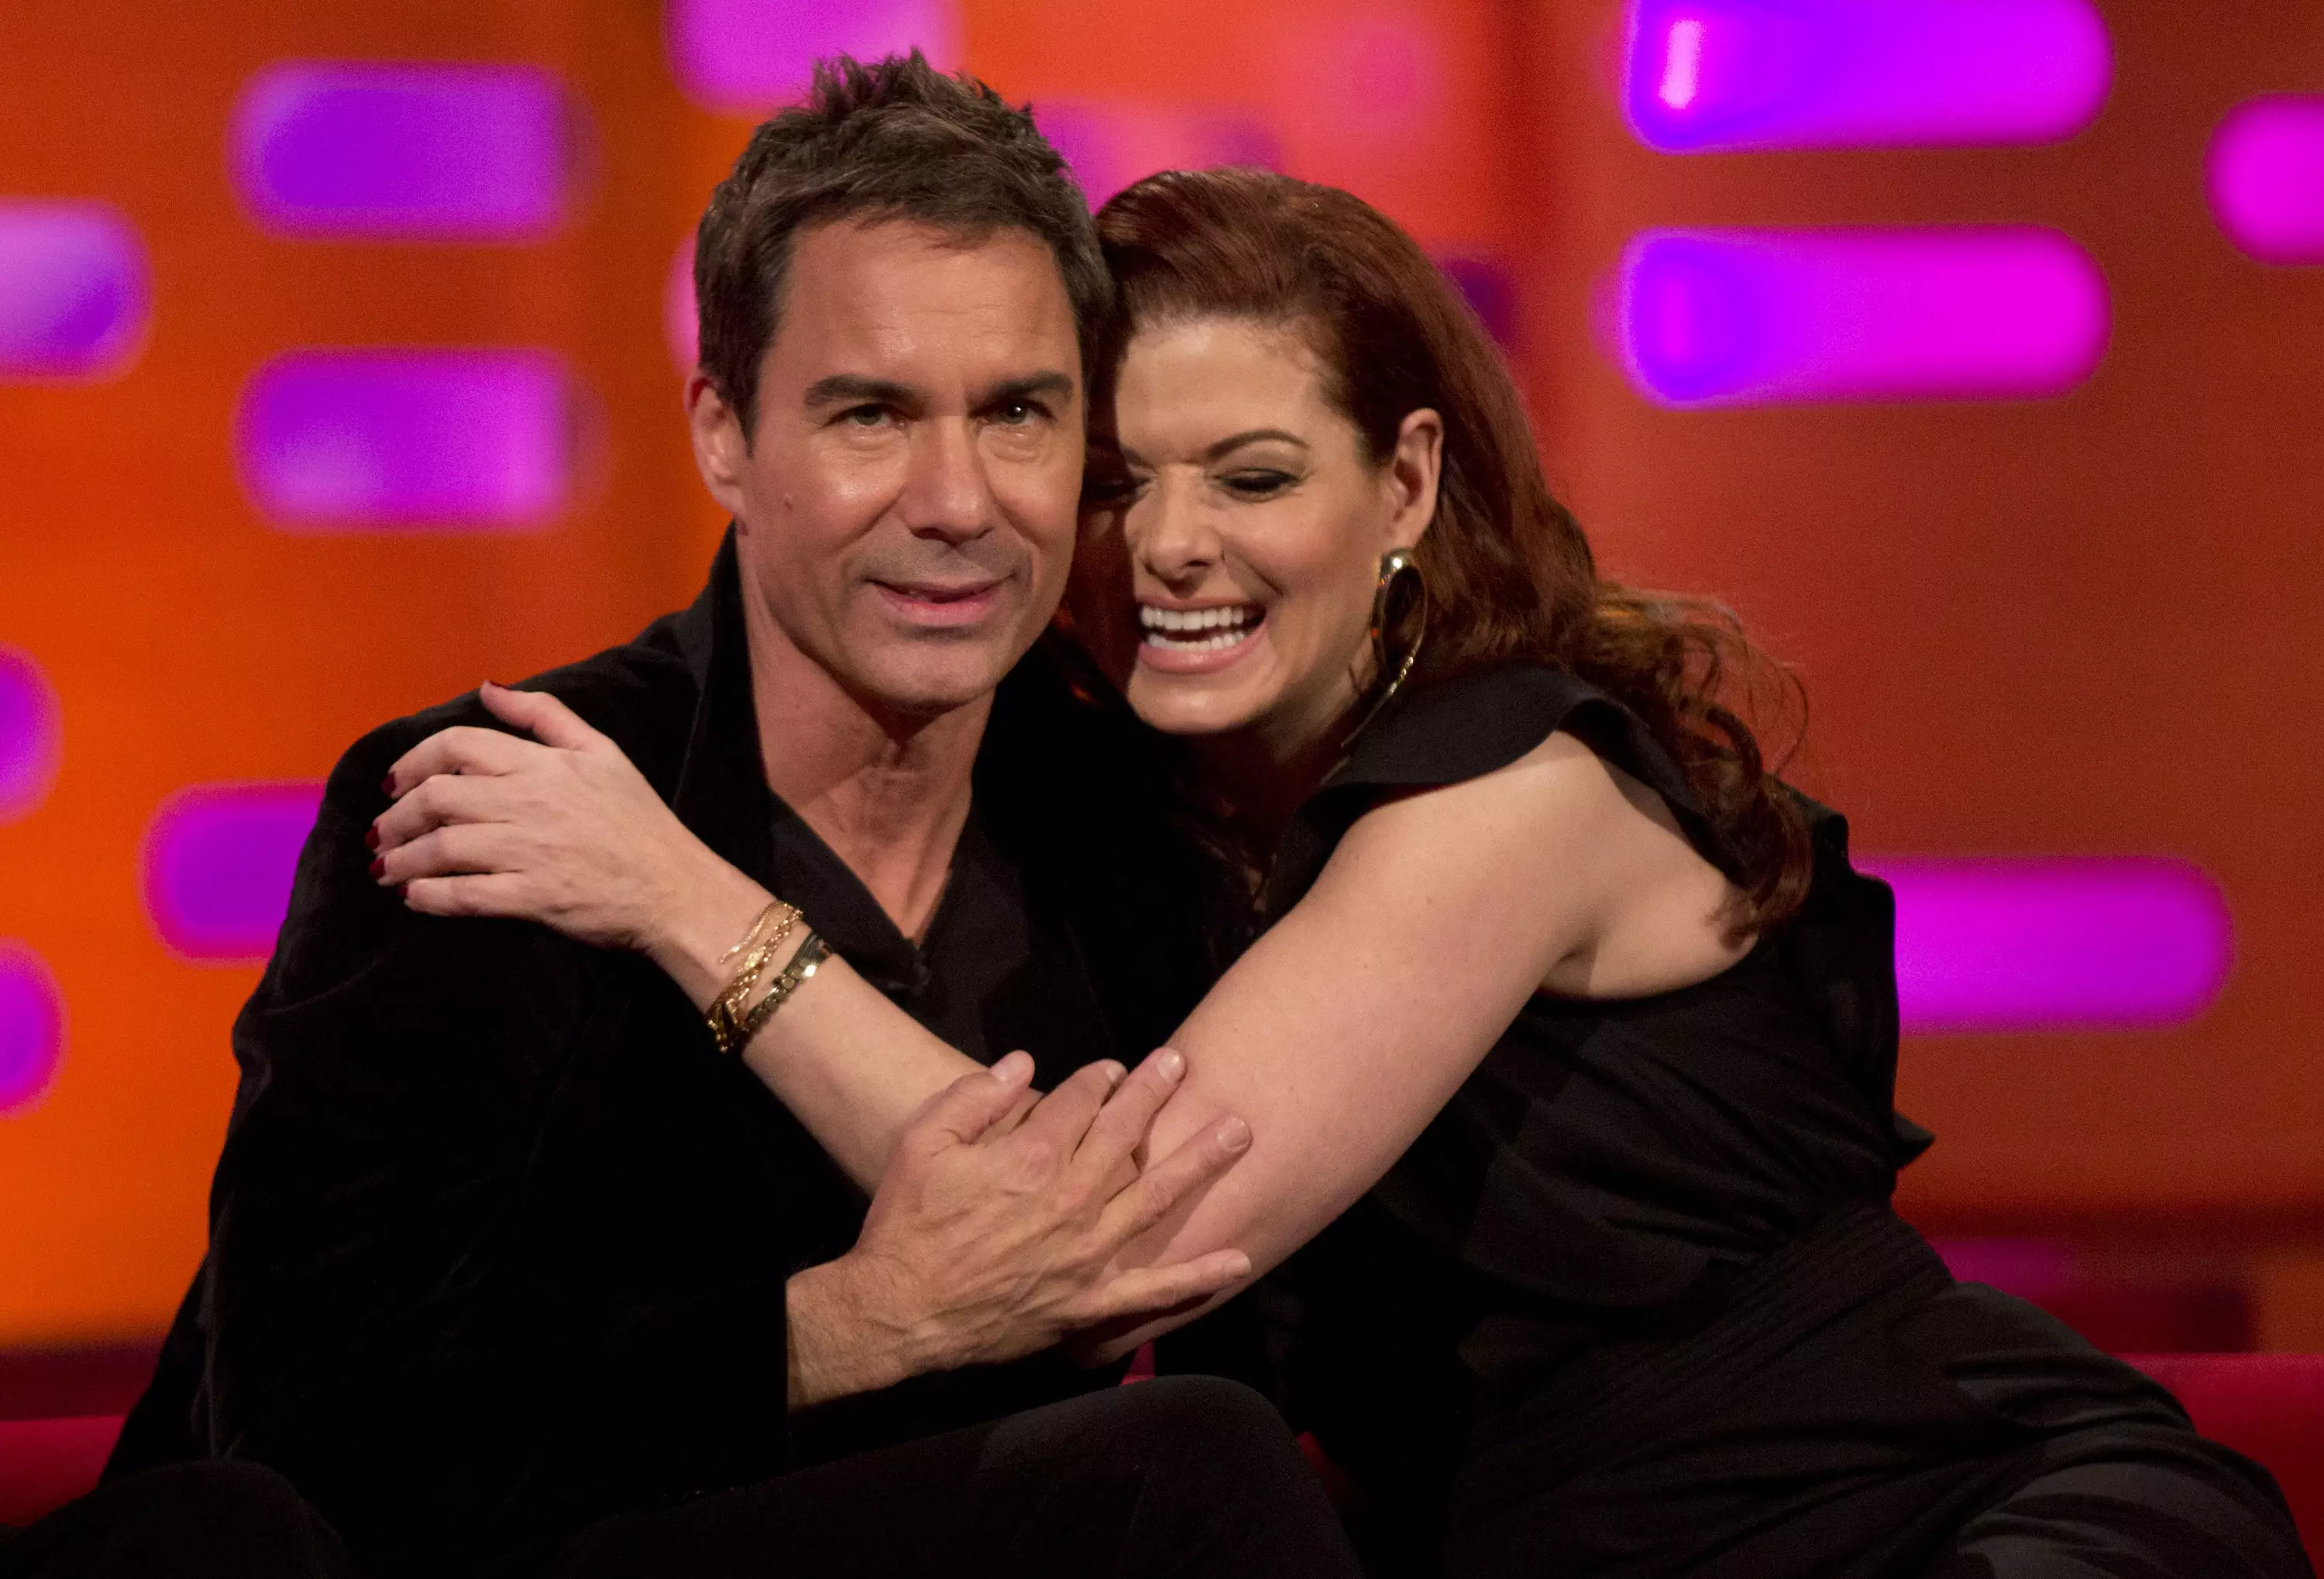 Eric McCormack and Debra Messing during filming of the Graham Norton Show.